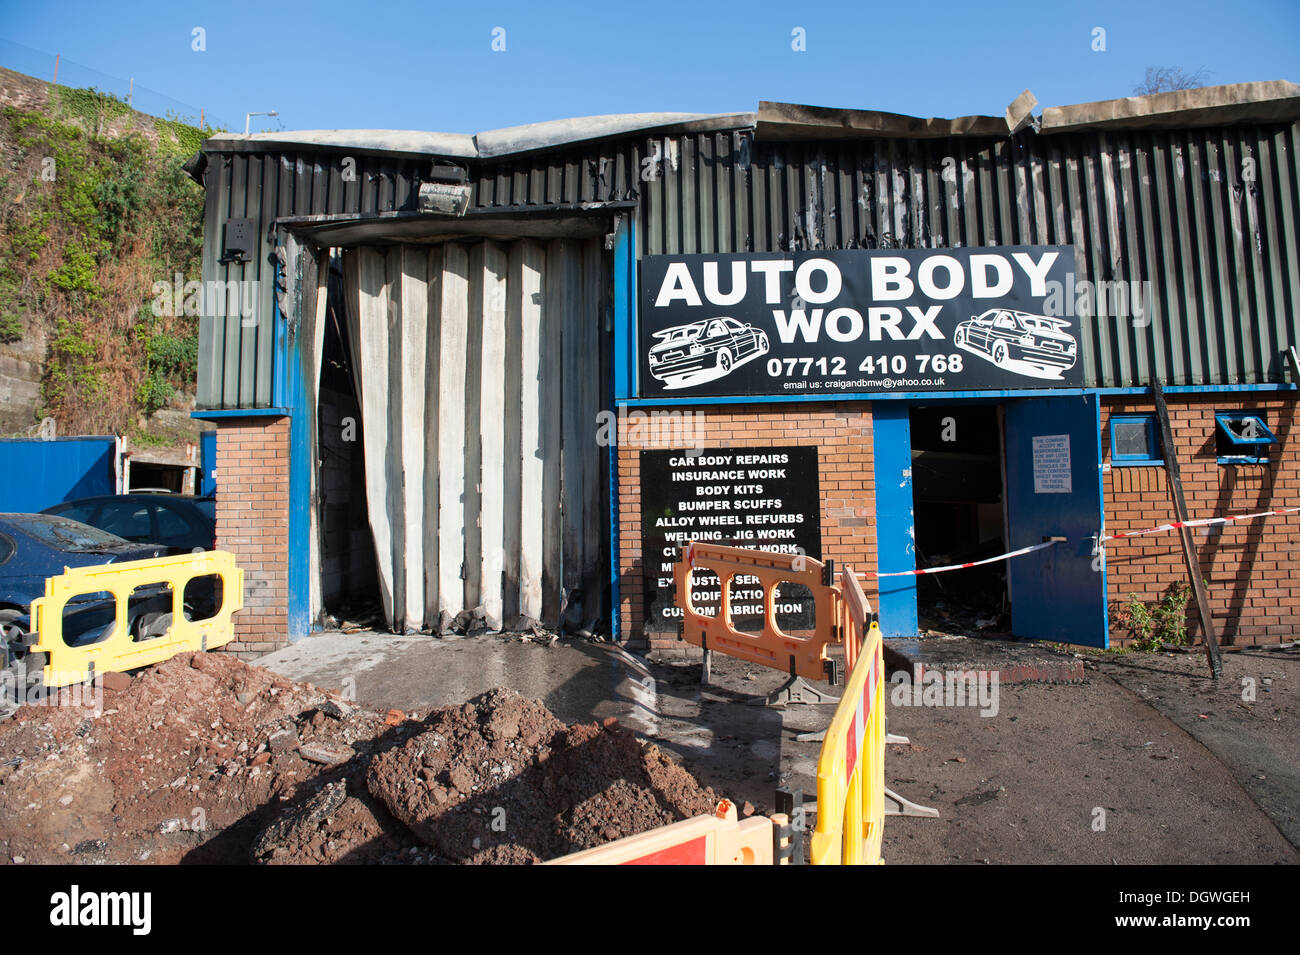 Car auto Body spray shop burnt out fire destroyed Stock Photo